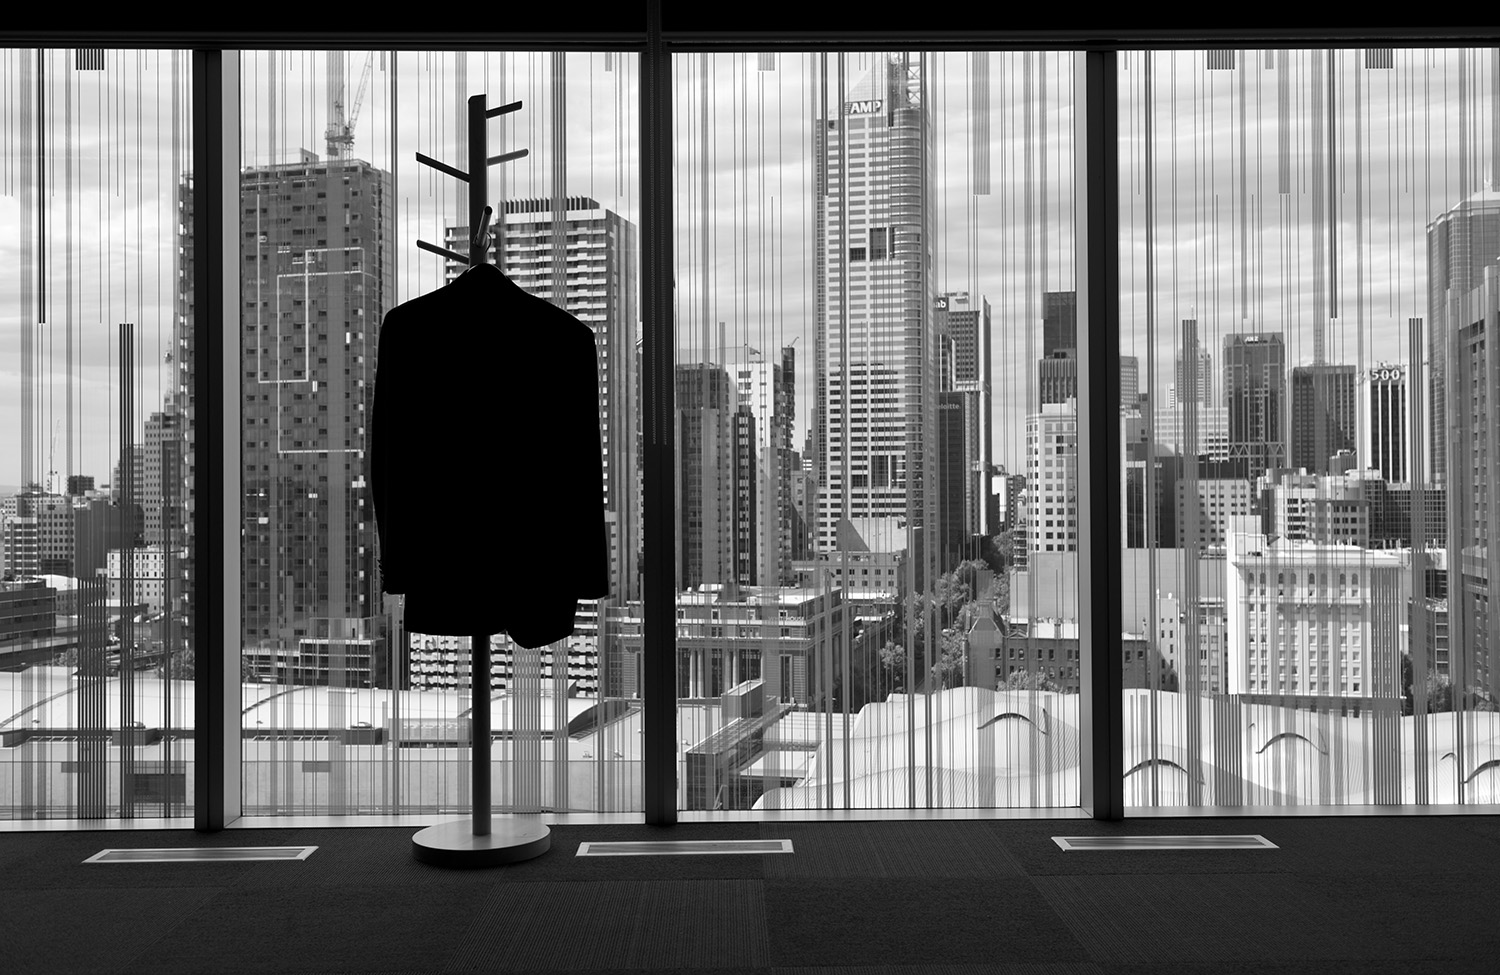 image of AARONTAIT COPYRIGHTED 2014 160 CORPORATE BUSINESS EXECUTIVES POWER COMMERCE DOCUMENTARY REPORTAGE OFFICE SILHOUETTE METAPHOR SUIT COAT VIEW PANORAMA  